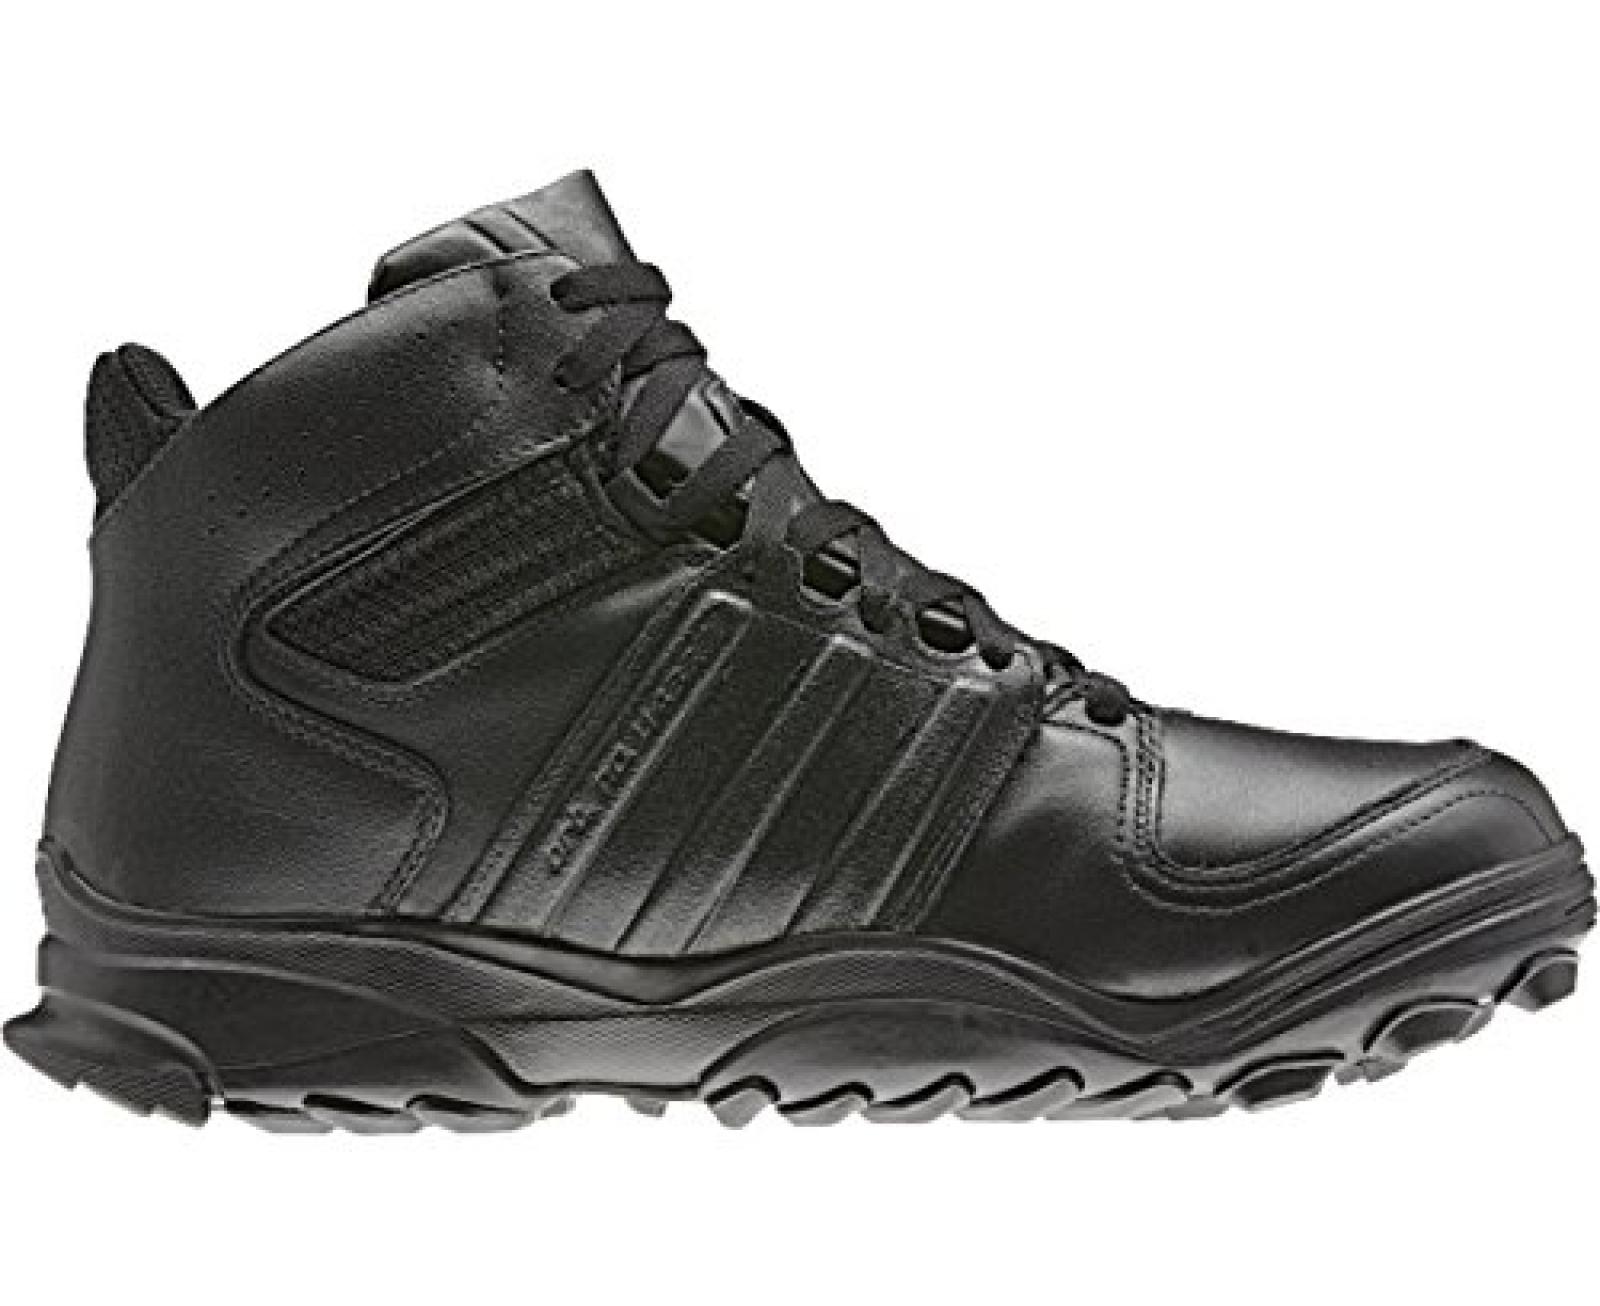 Adidas GSG 9.4 Low Military Boots - Black - UK 6.5 